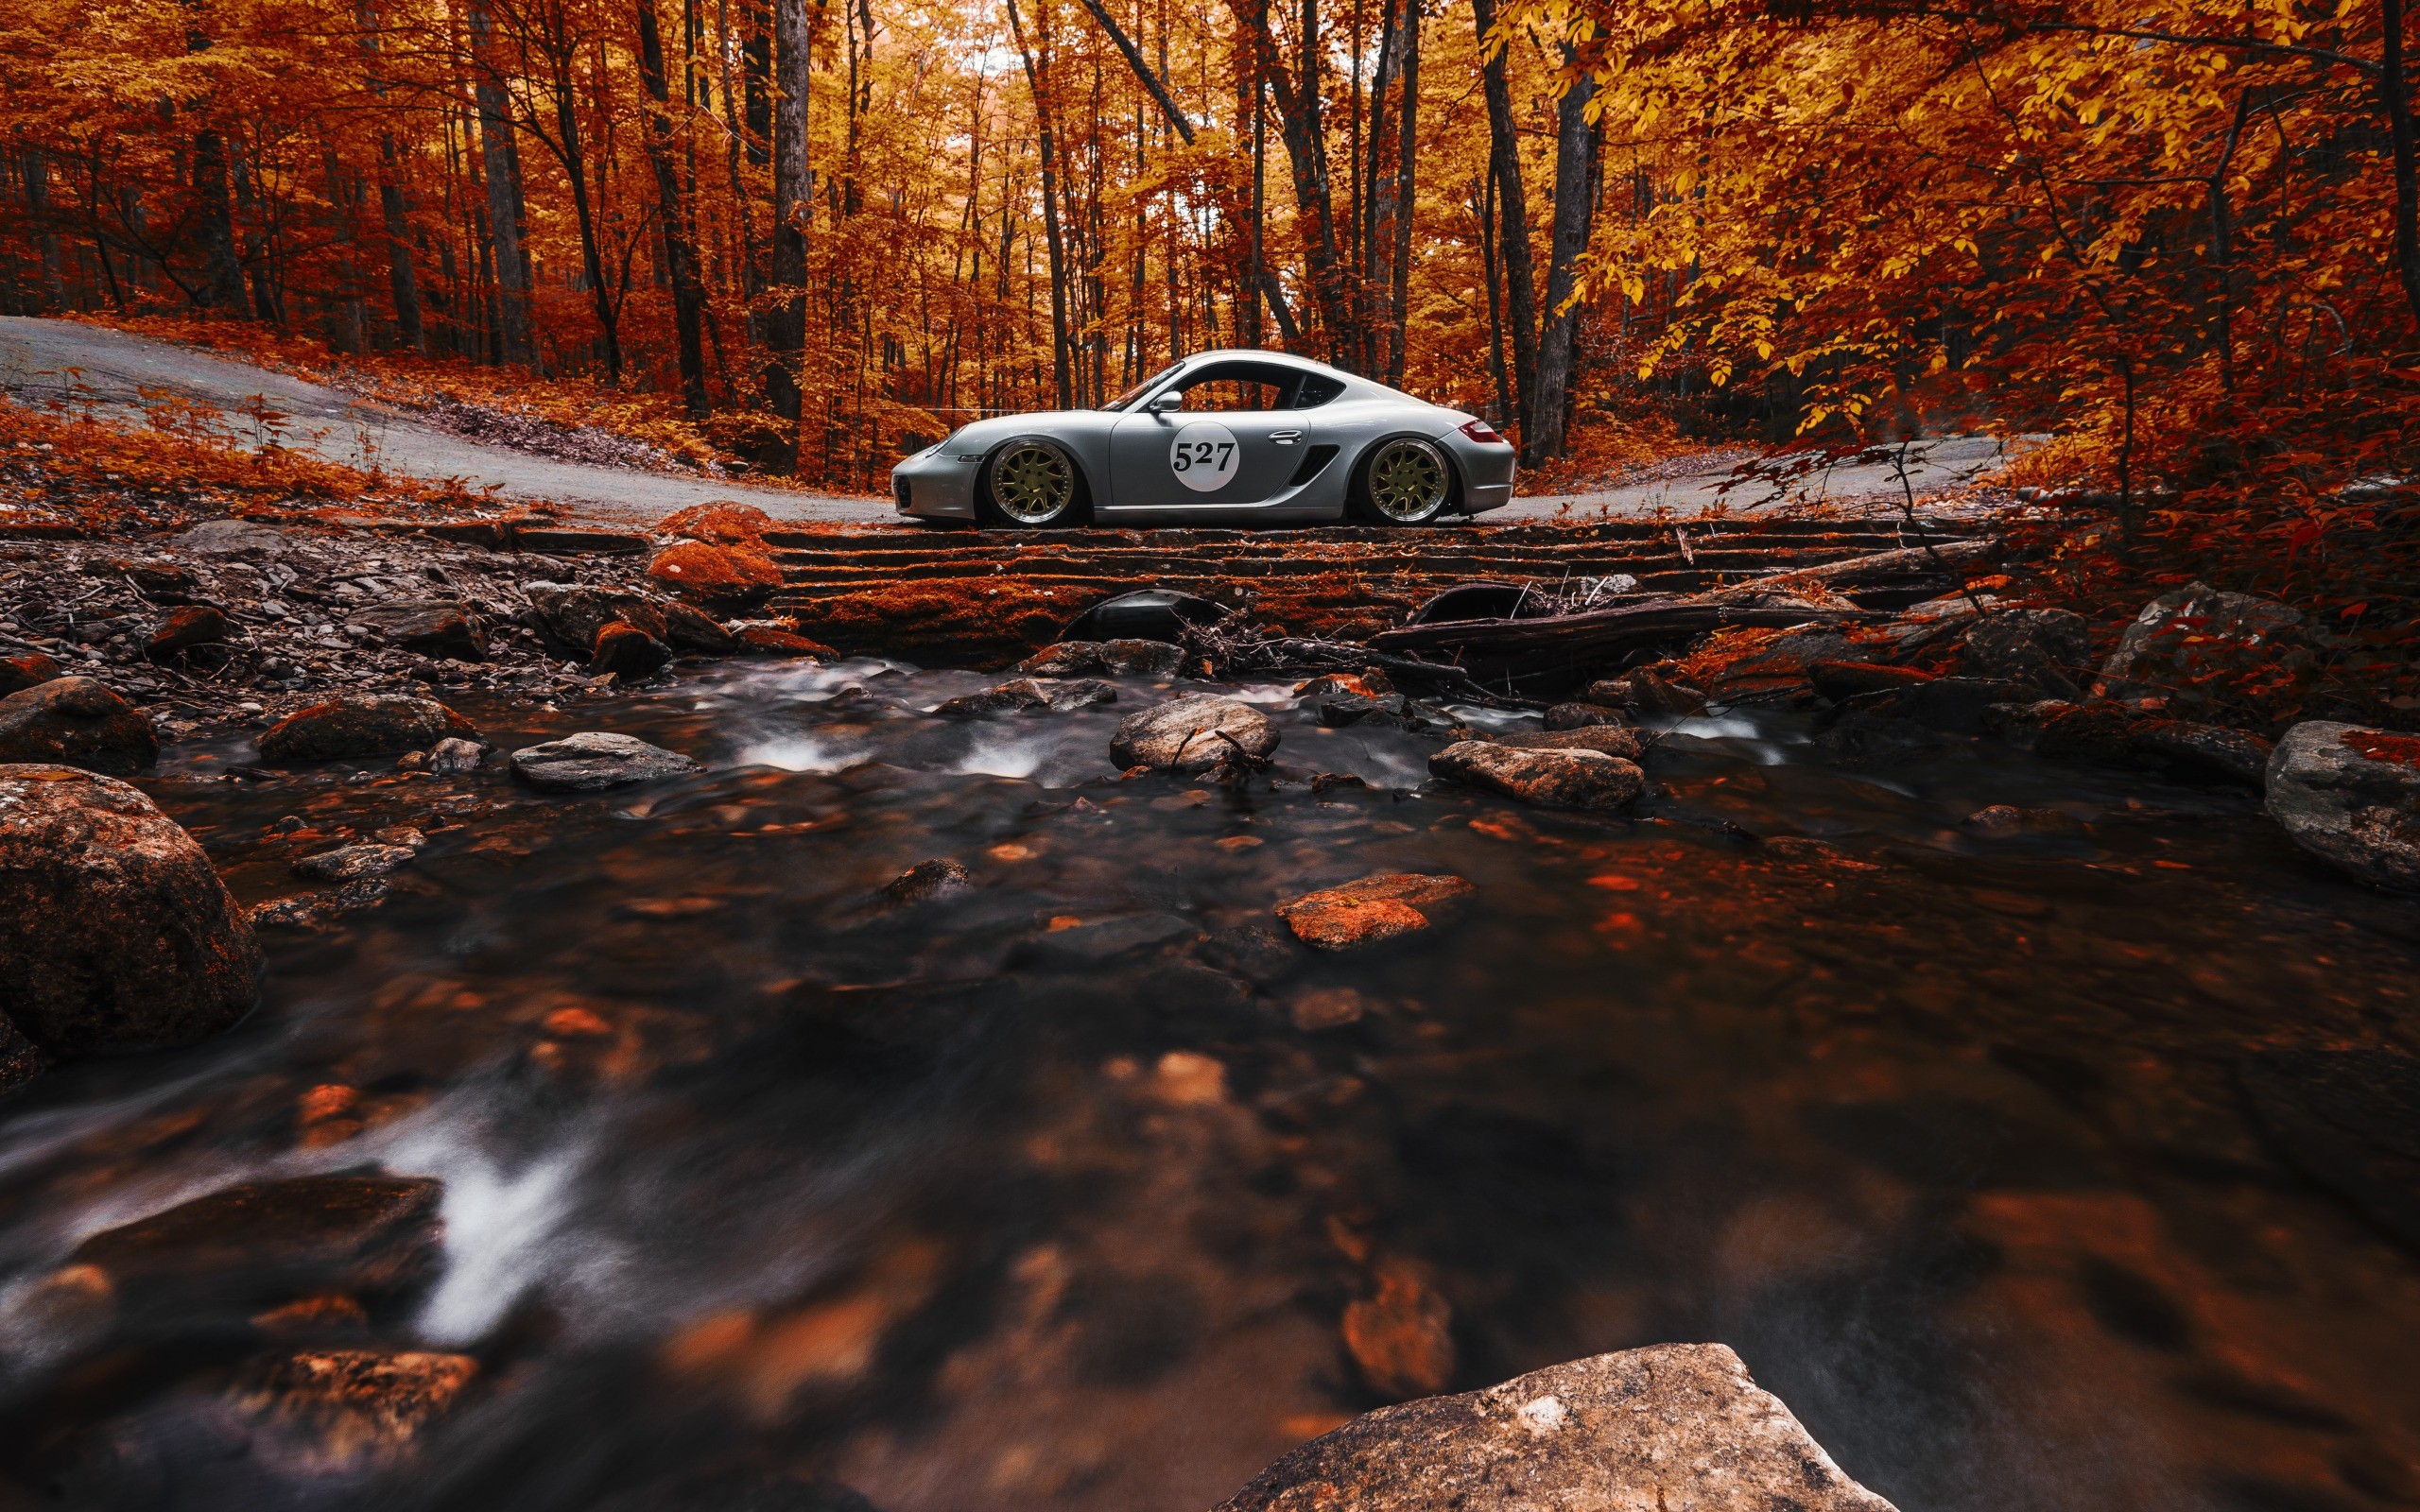 General 2560x1600 nature car trees forest fall vehicle leaves long exposure stream stones road rocks sports car side view Porsche Porsche 987 Porsche Cayman silver cars German cars Volkswagen Group